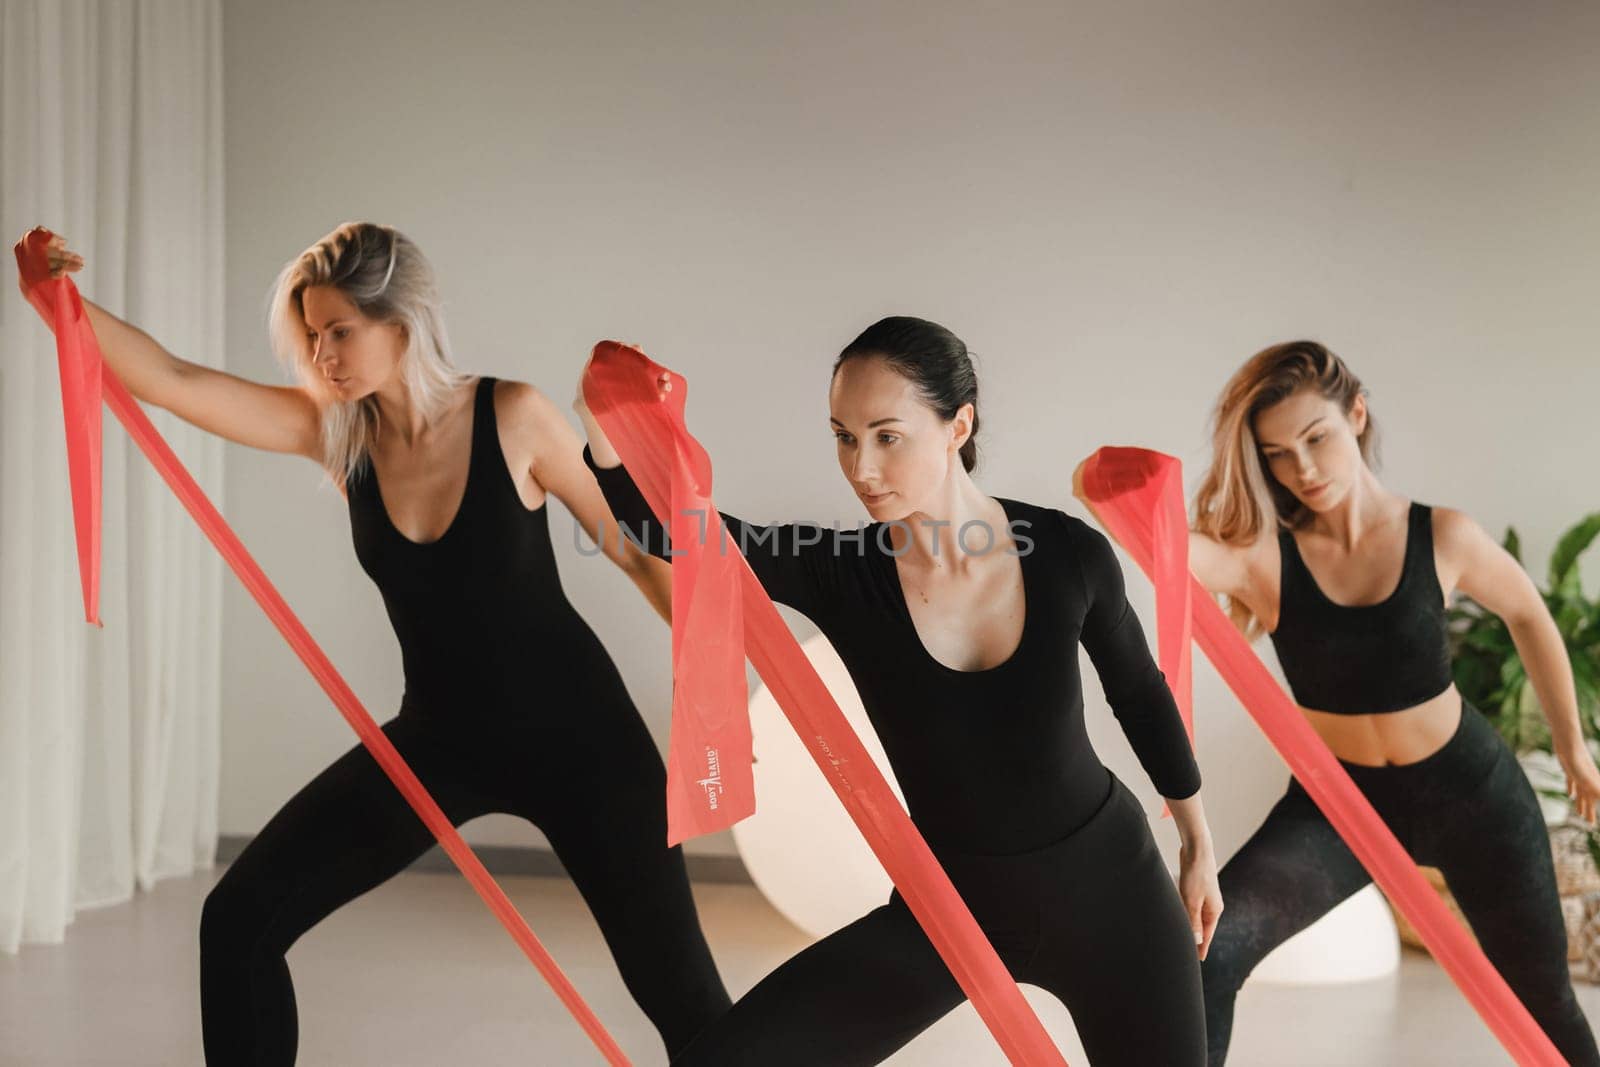 Girls in black are doing fitness with red ribbons indoors.